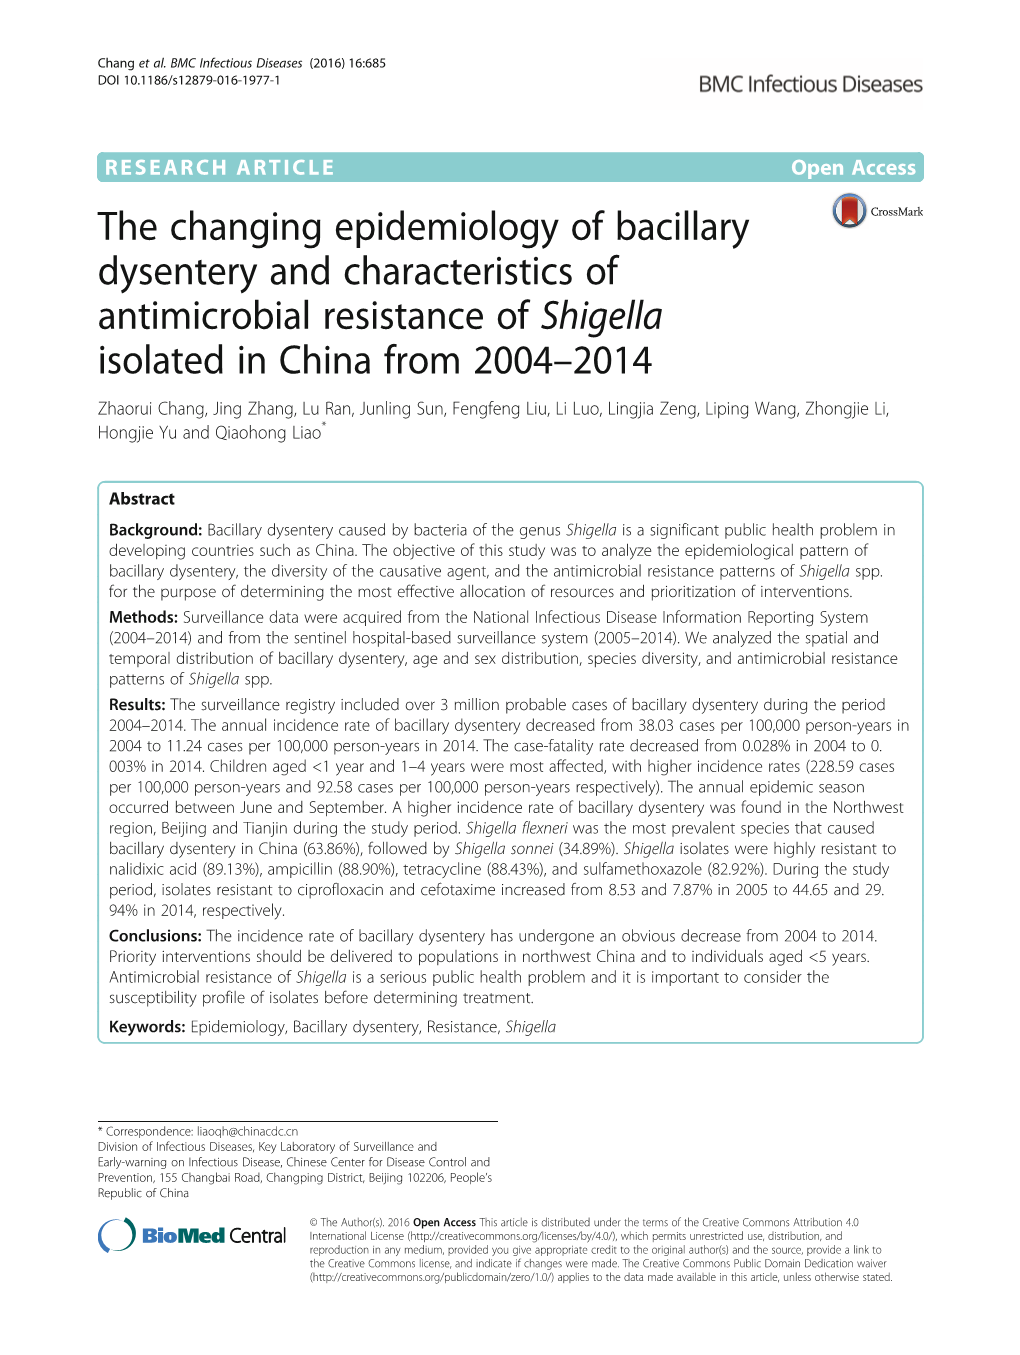 The Changing Epidemiology of Bacillary Dysentery